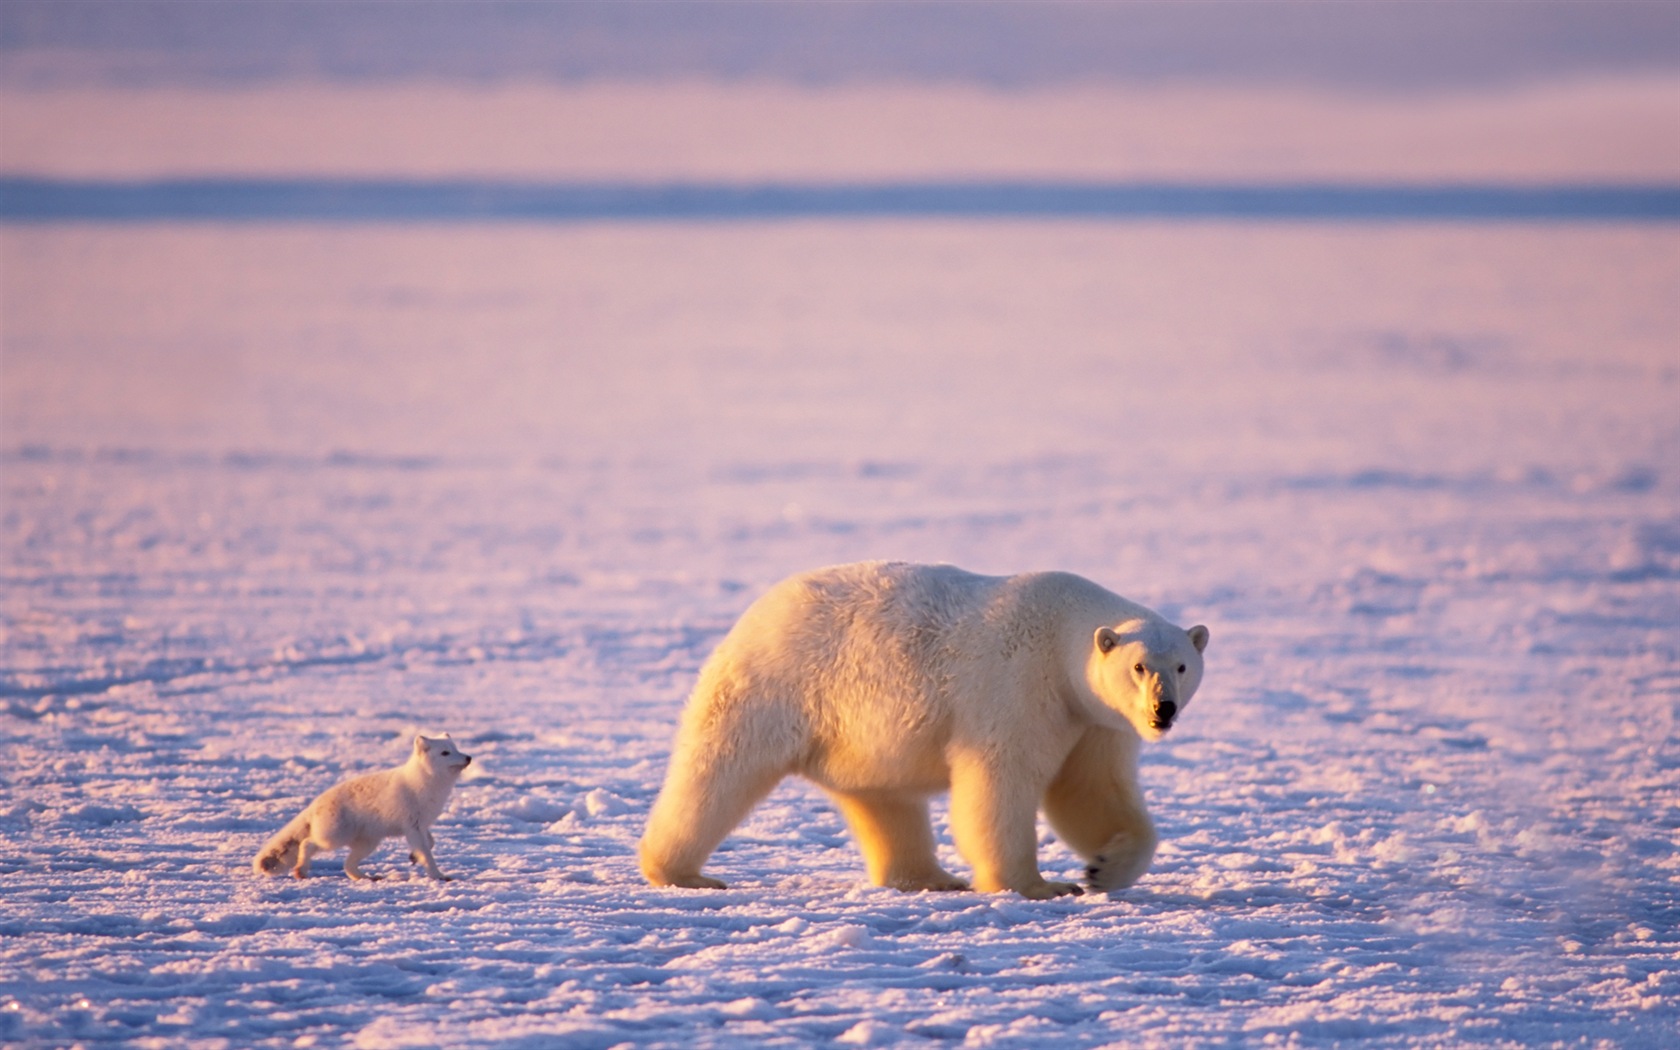 Windows 8 Wallpapers: Arctic, the nature ecological landscape, arctic animals #10 - 1680x1050